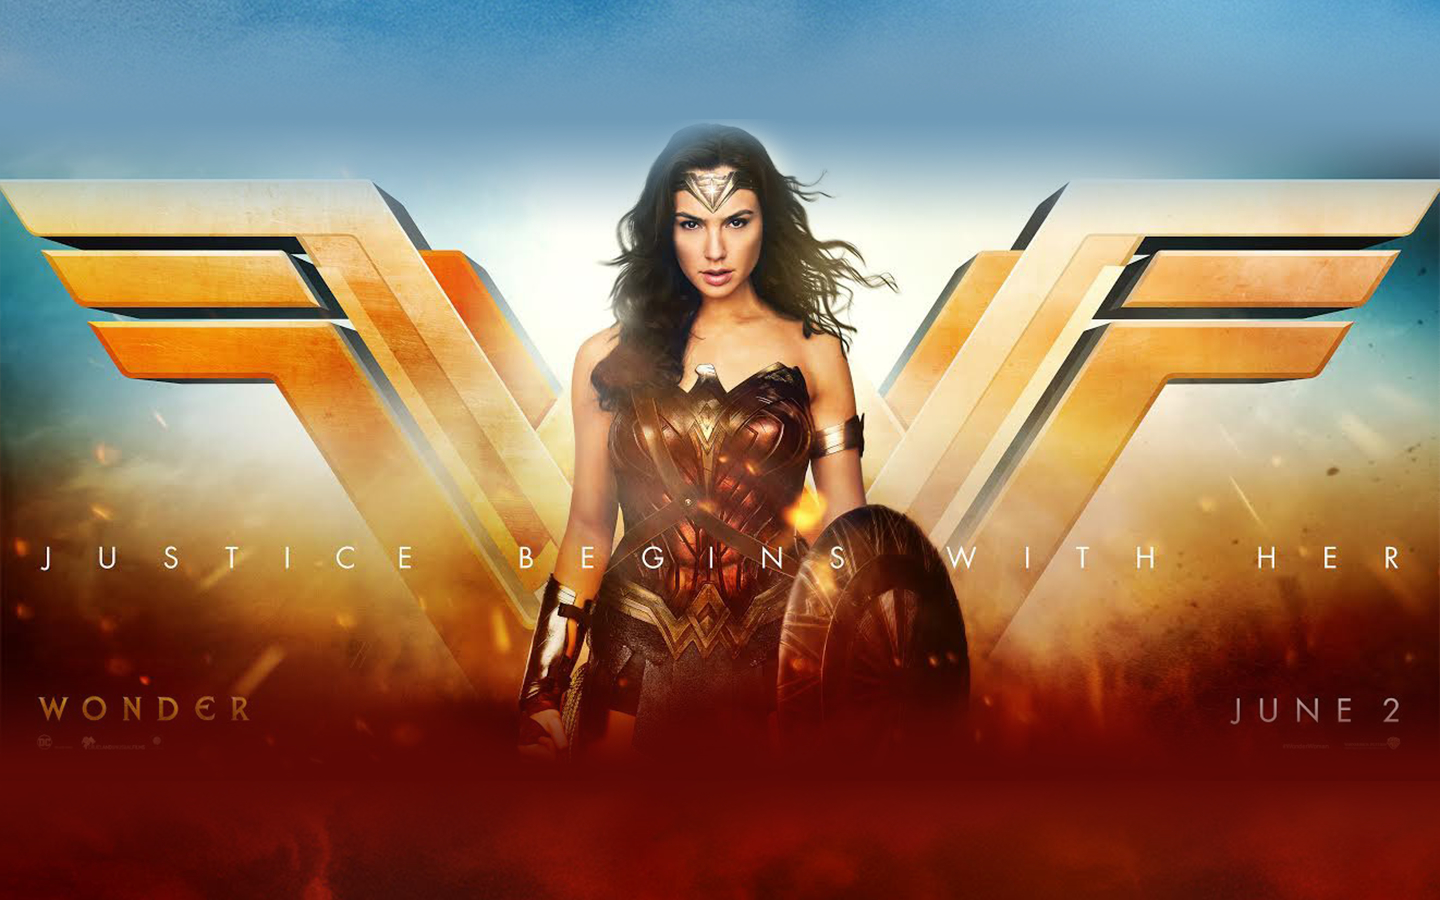 New Poster and Banner for ‘Wonder Woman’ Plus #AskWonderWoman Q&A with Patty Jenkins & Cast